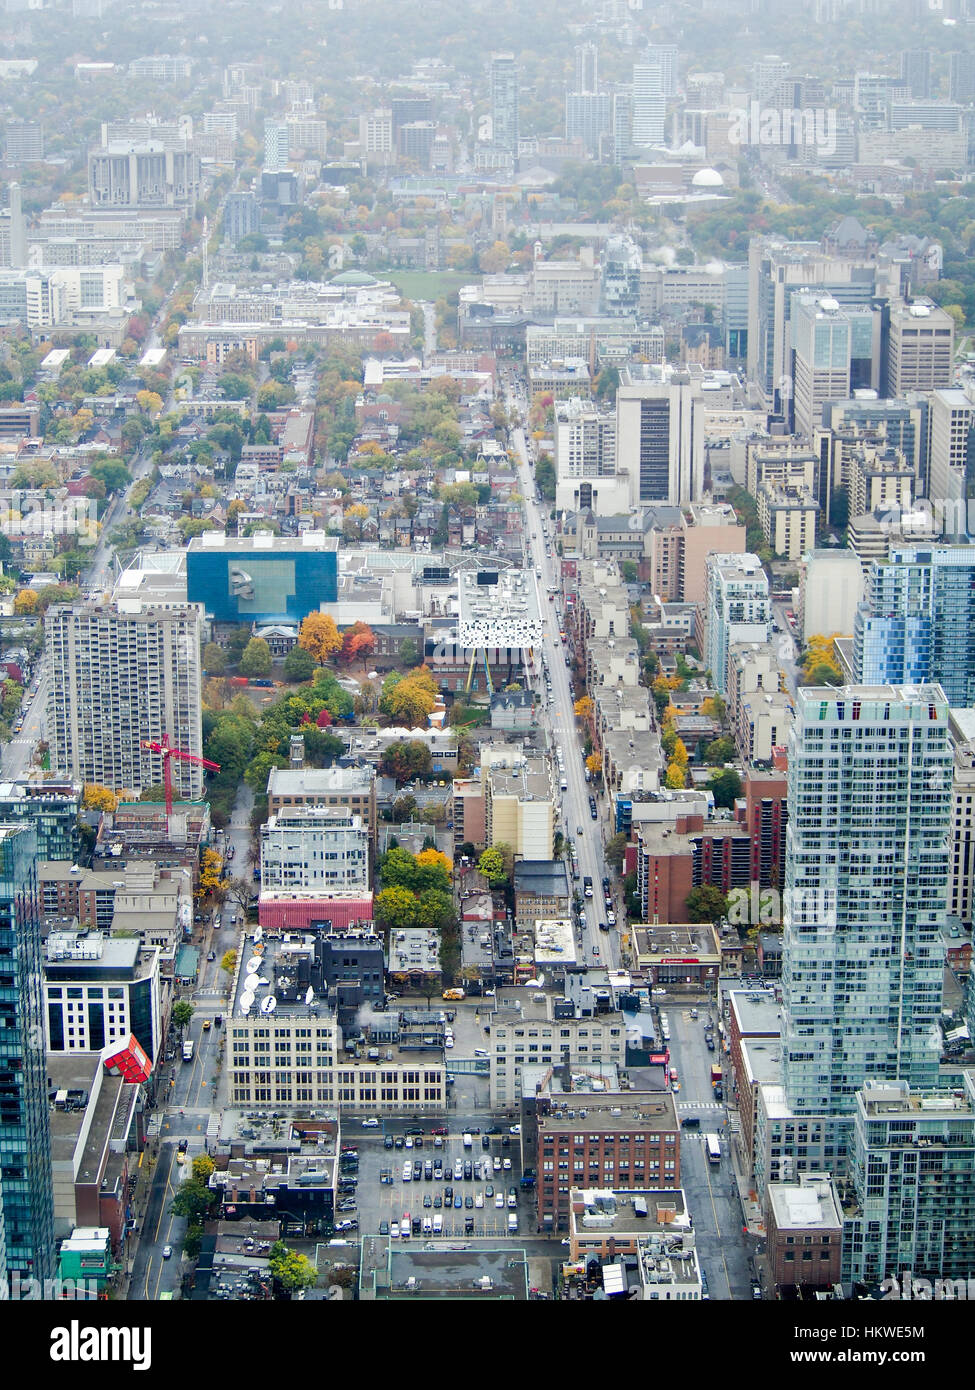 An aerial view of downtown Toronto in Canada. Stock Photo